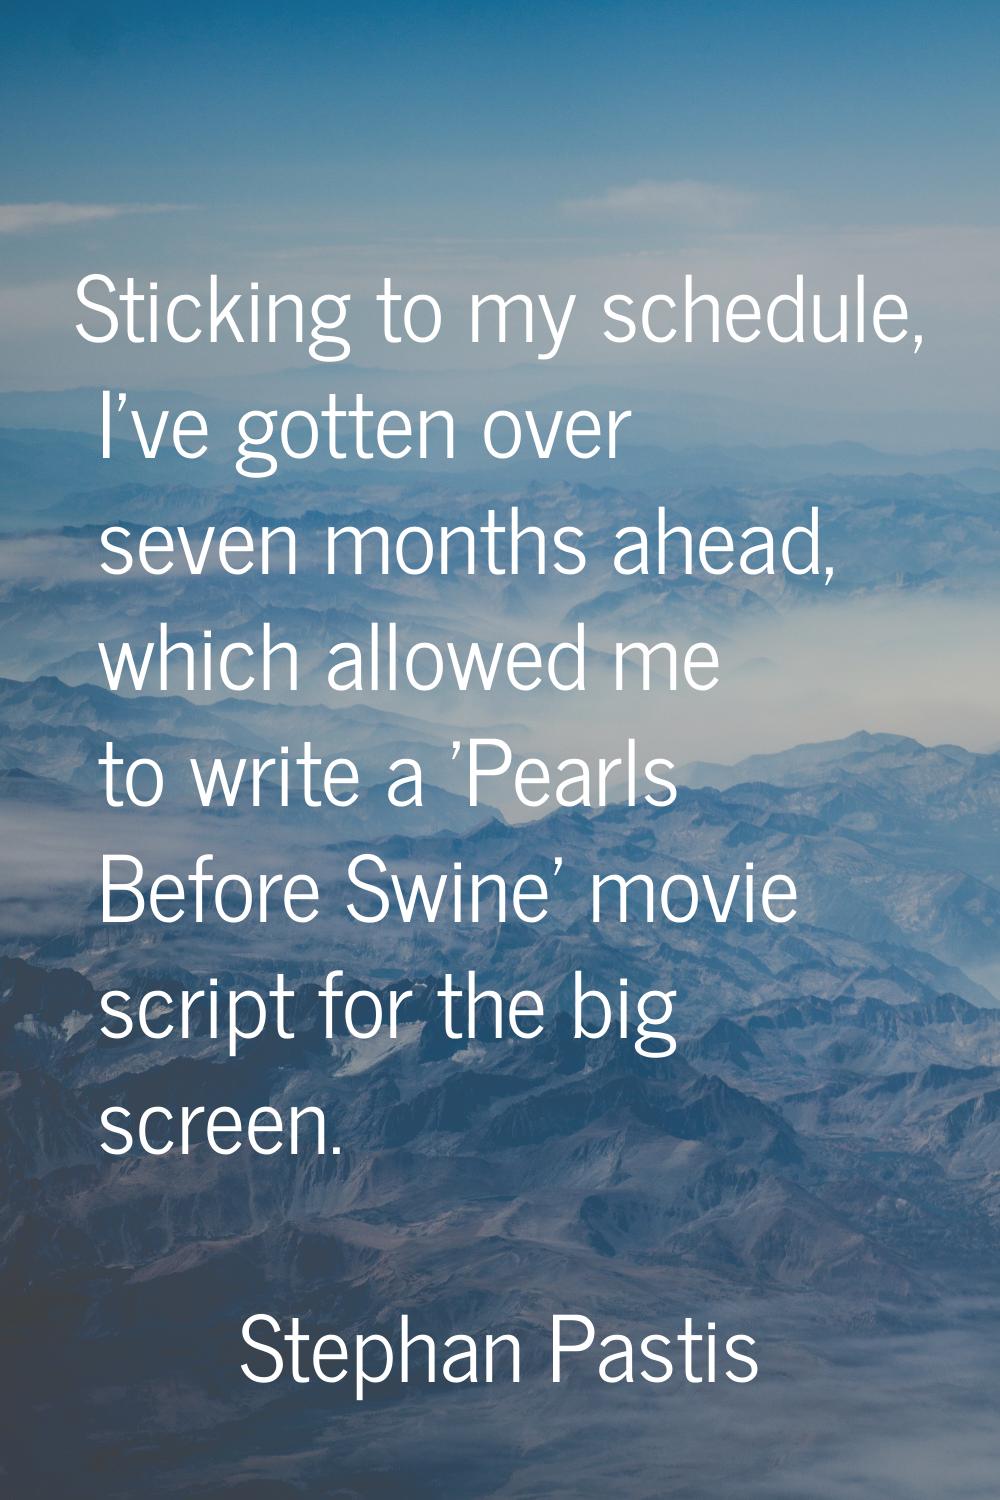 Sticking to my schedule, I've gotten over seven months ahead, which allowed me to write a 'Pearls B